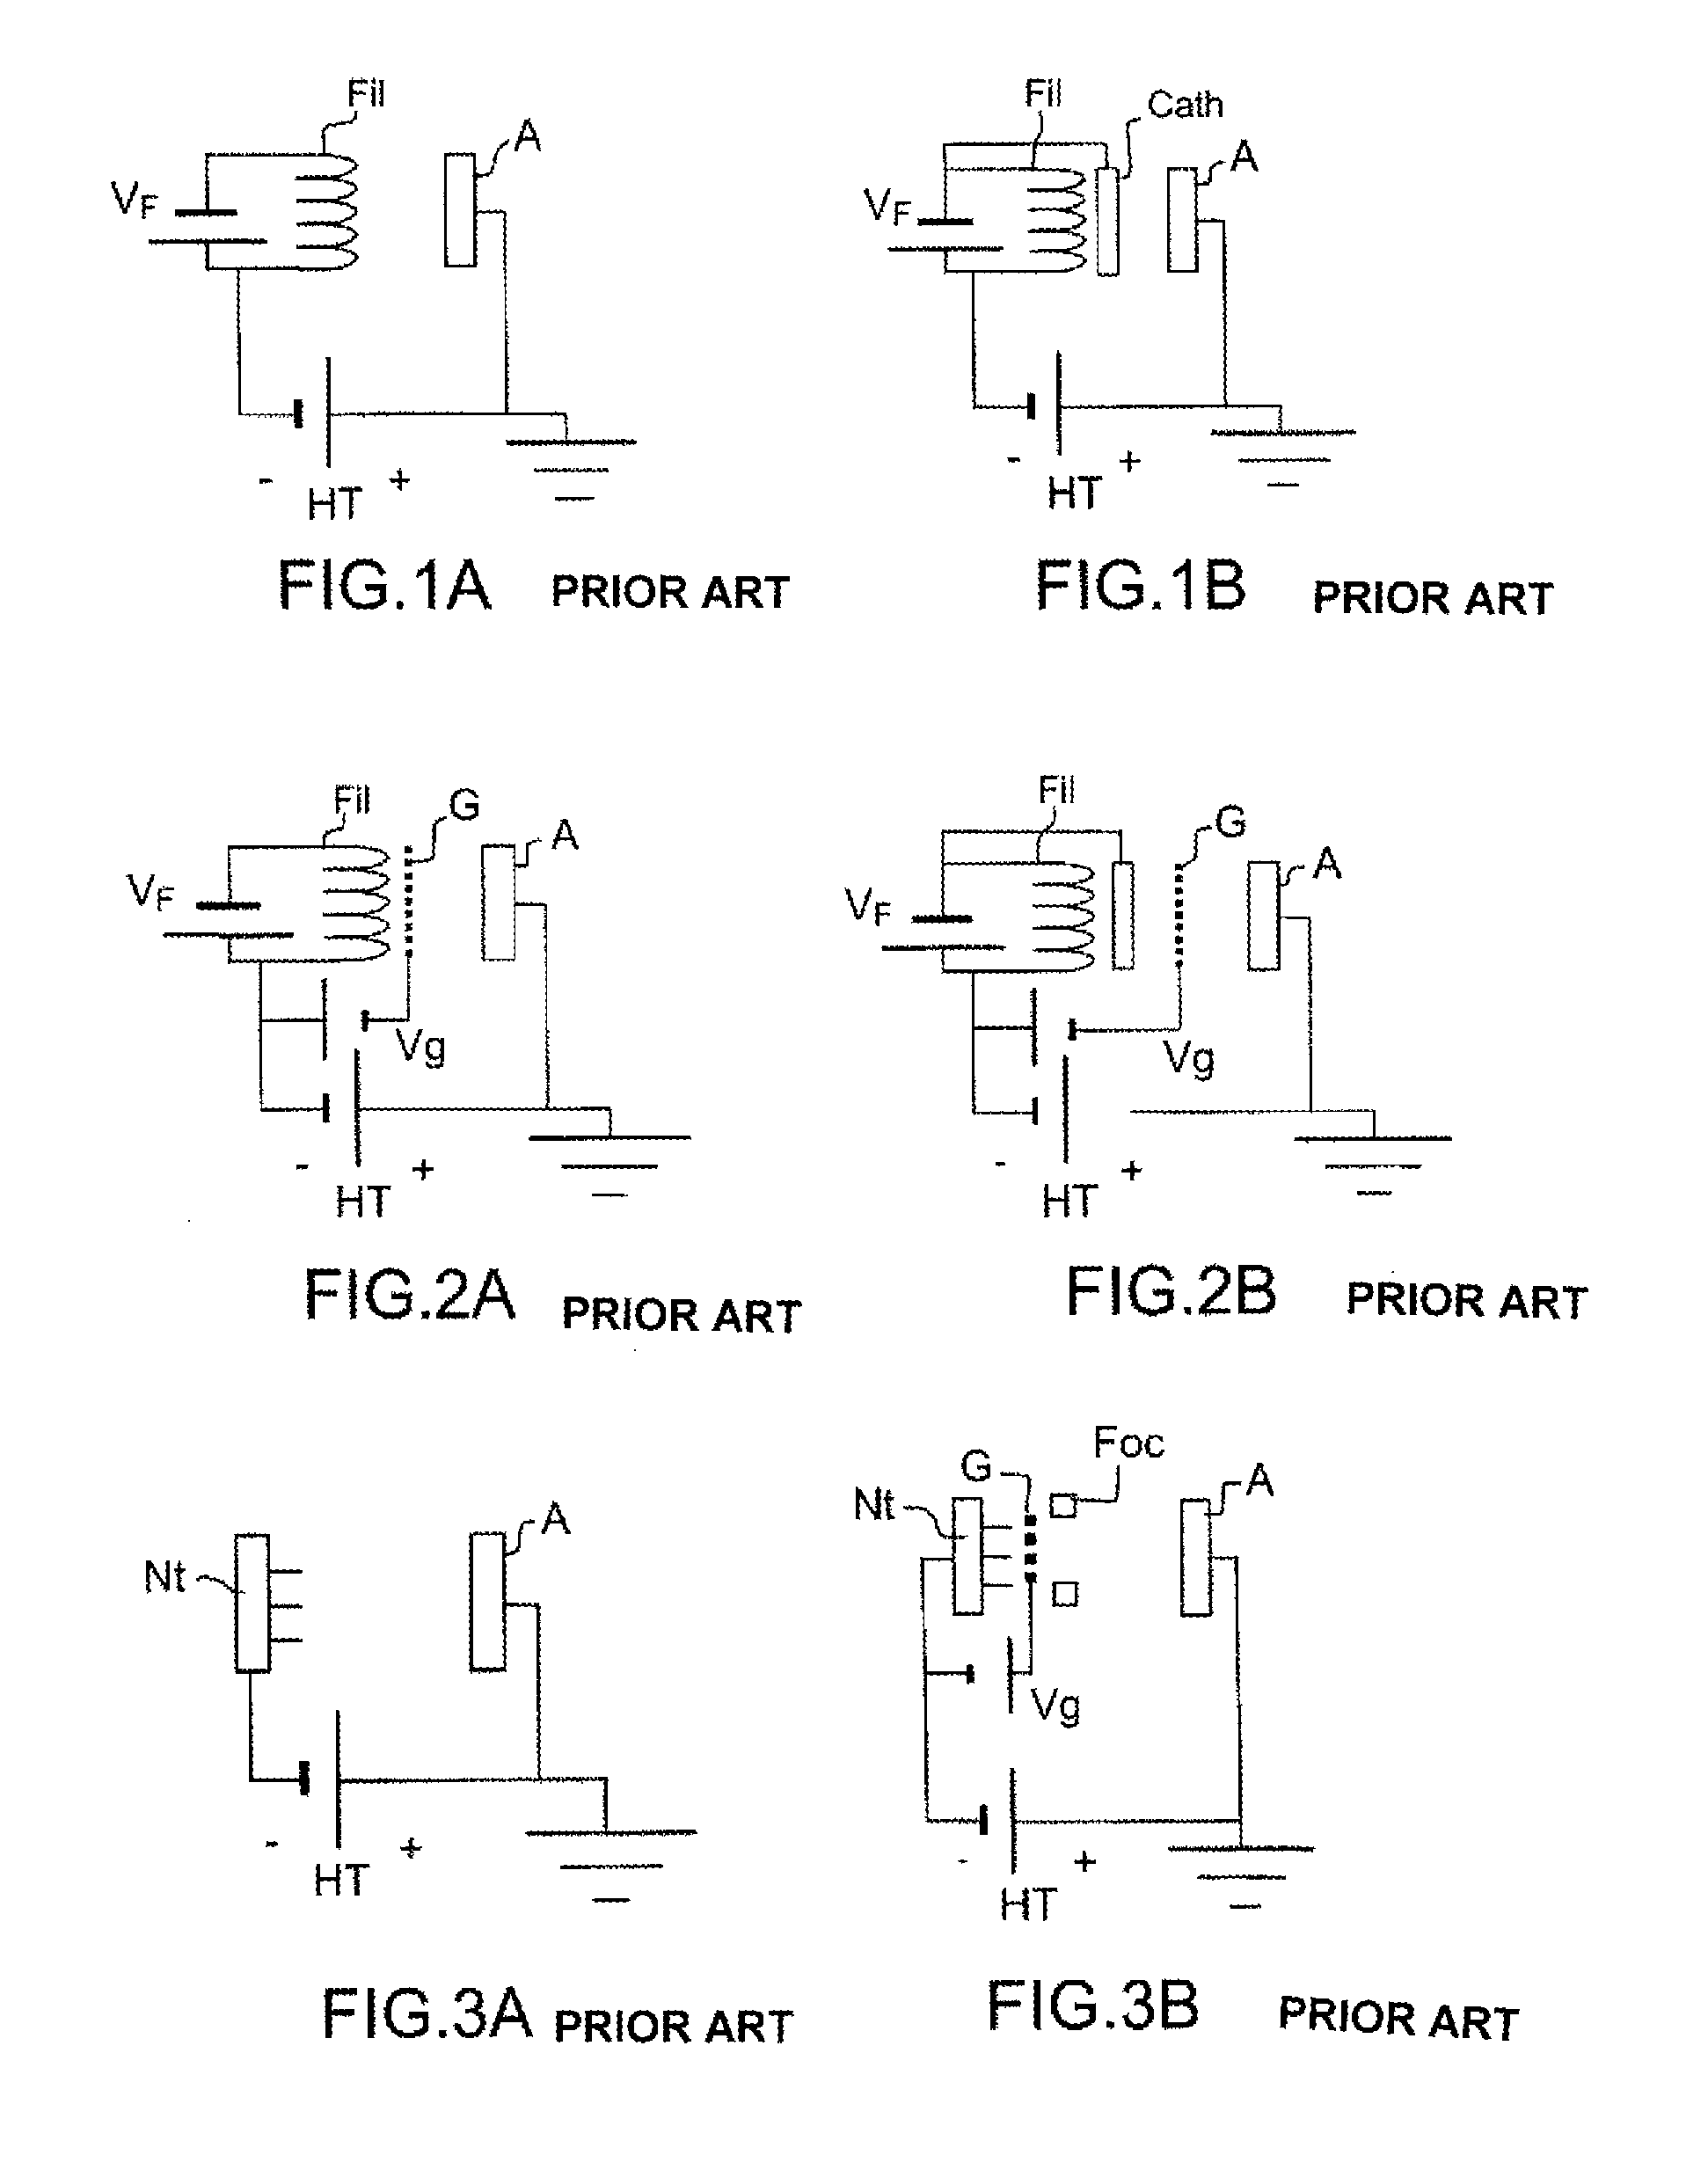 X-rays source comprising at least one electron source combined with a photoelectric control device